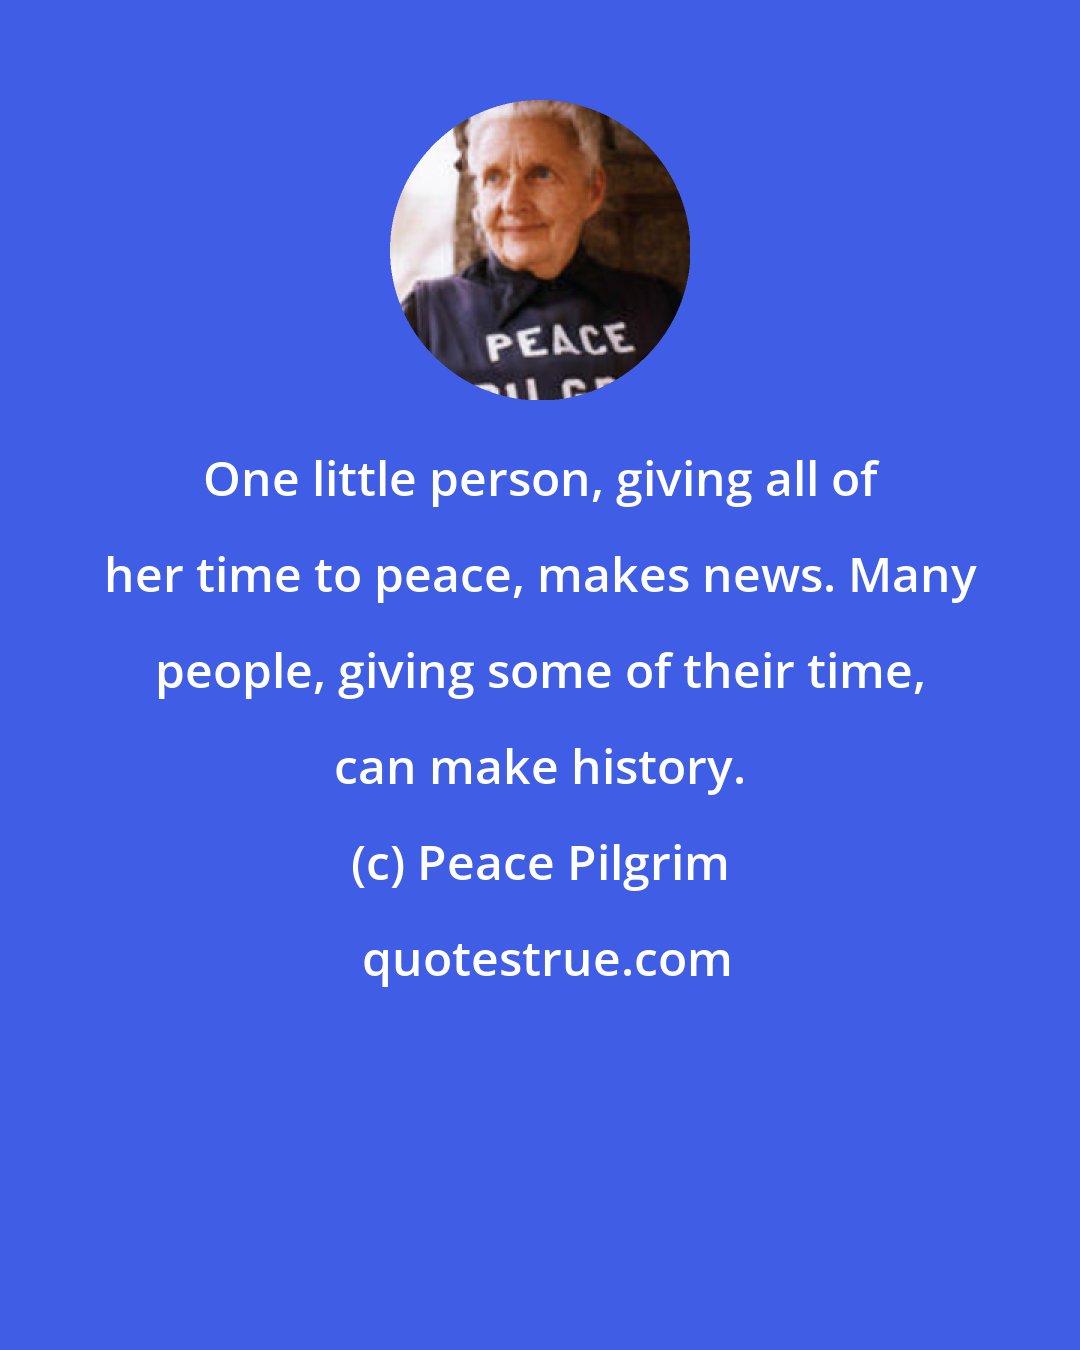 Peace Pilgrim: One little person, giving all of her time to peace, makes news. Many people, giving some of their time, can make history.